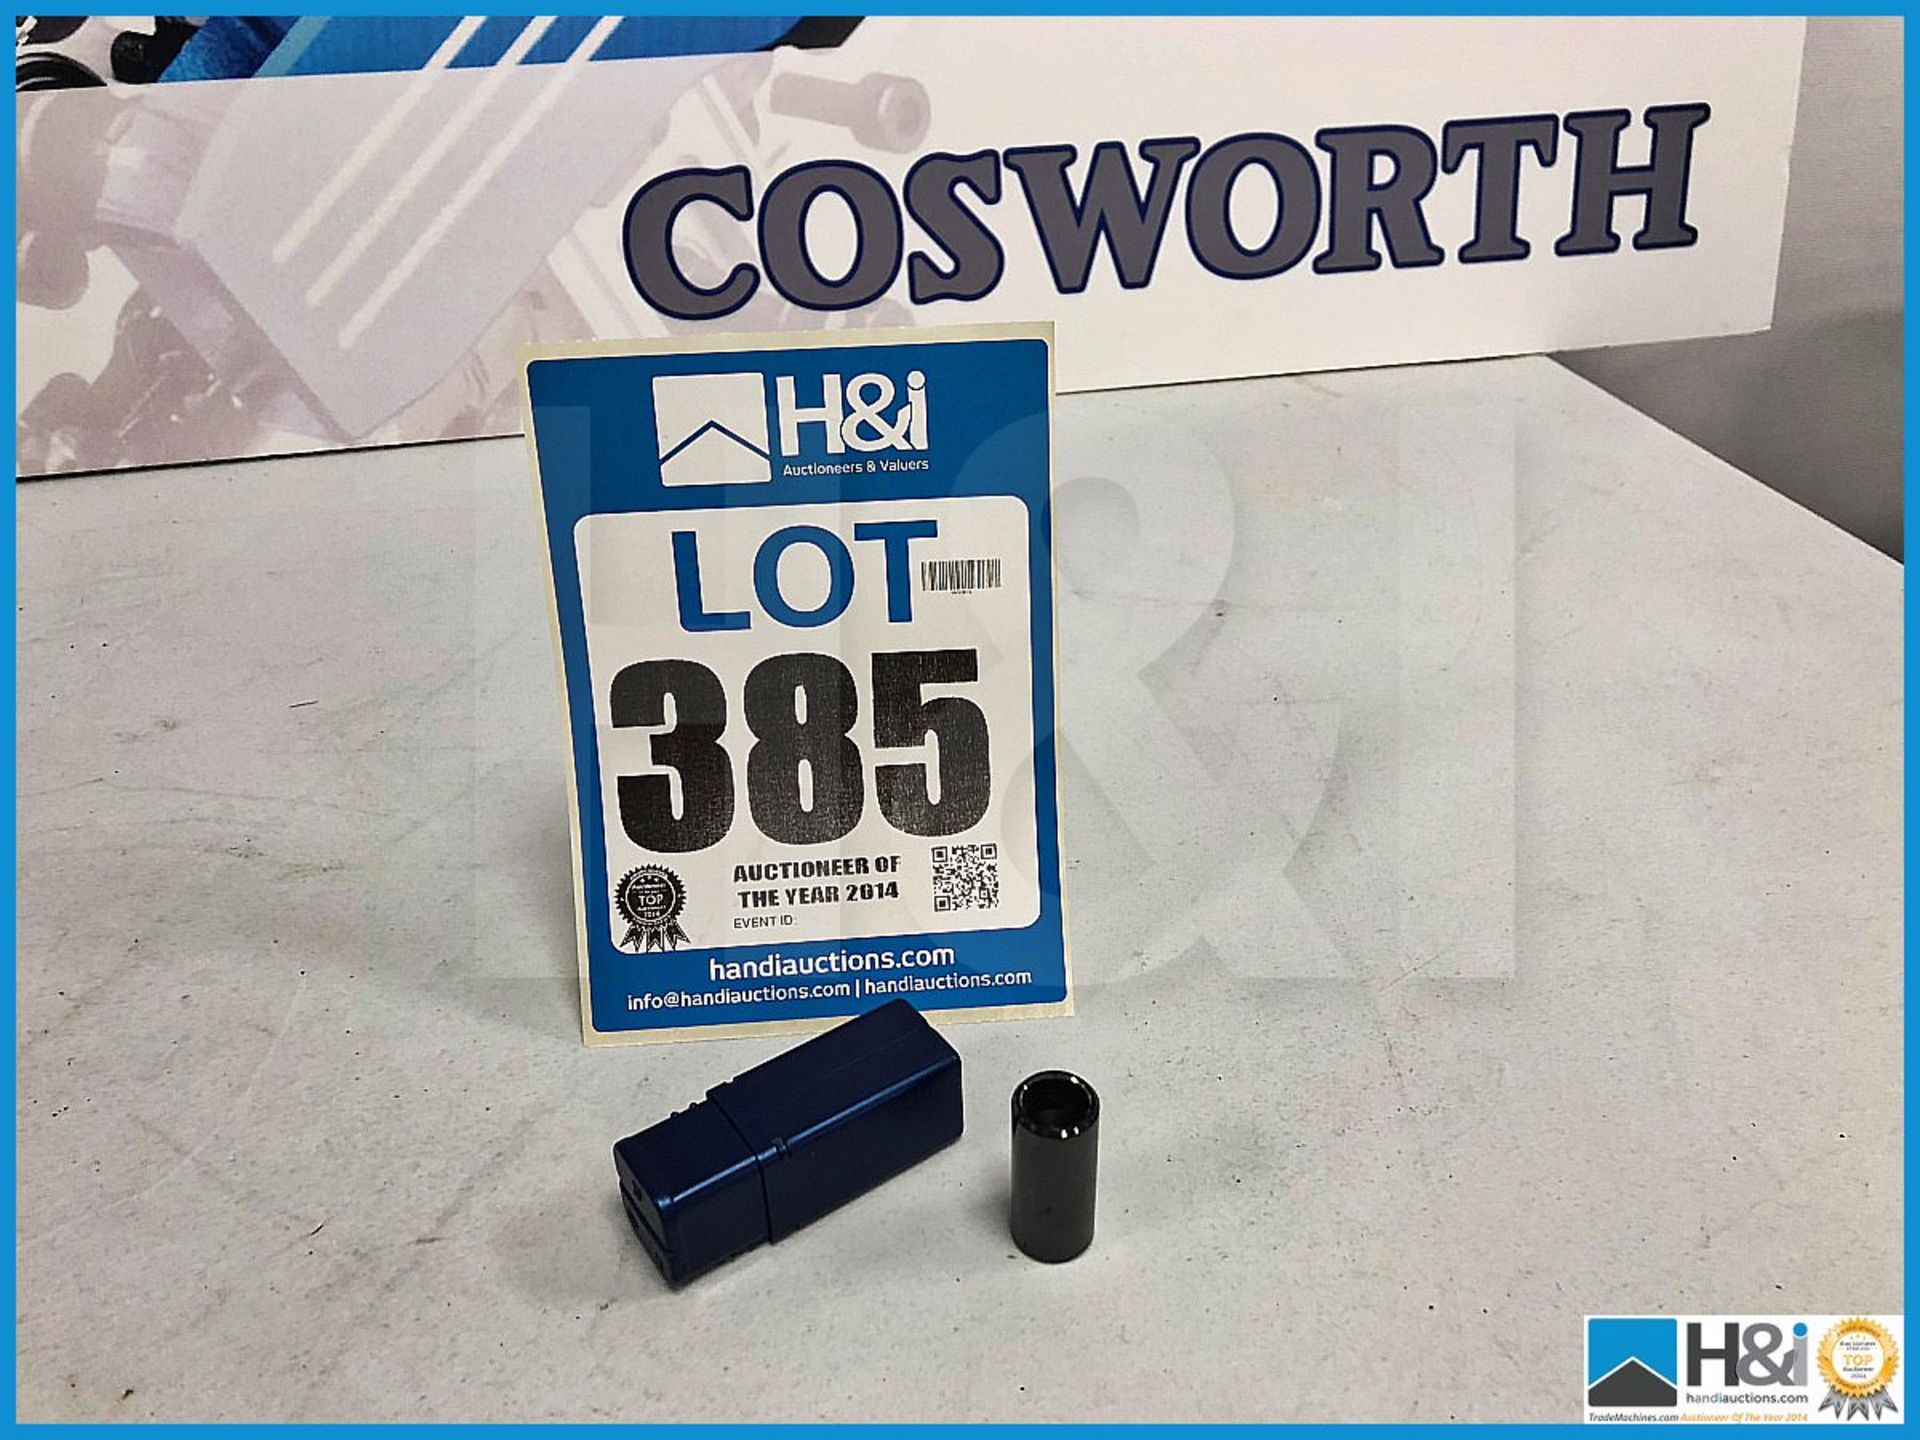 Approx 58 x 16mm x 35.385 x 10.20 DLC coated Cosworth gudgeon pins. Code: 20018994. Lot 235. RRP GBP